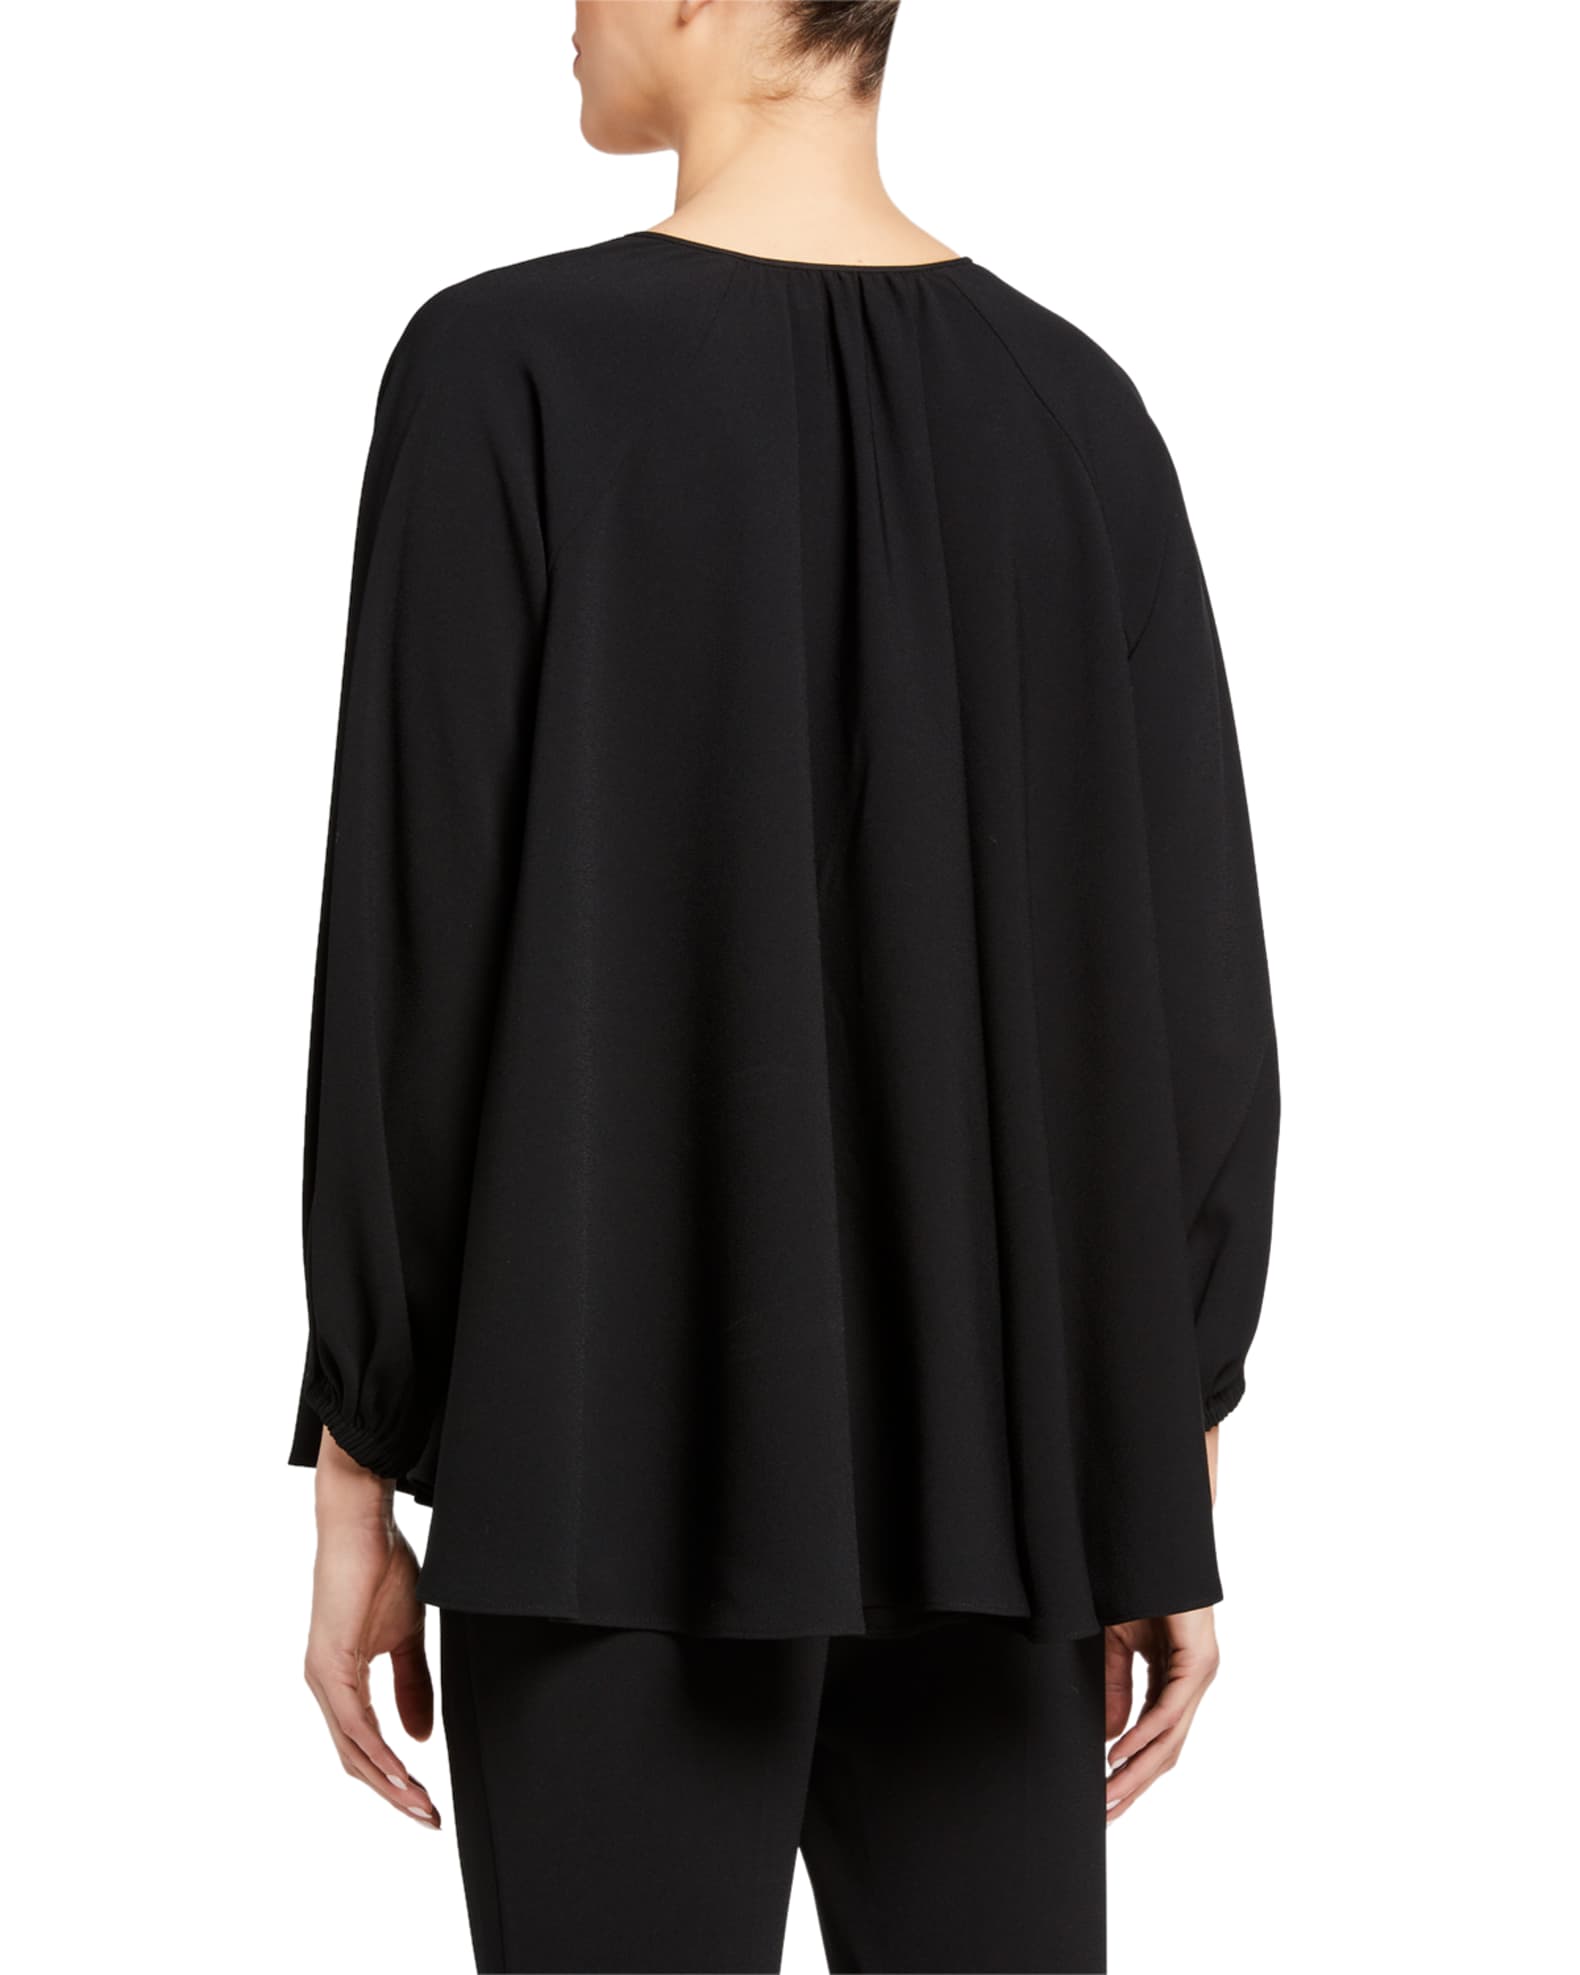 Japanese Crepe Tie-Neck Top and Matching Items | Neiman Marcus